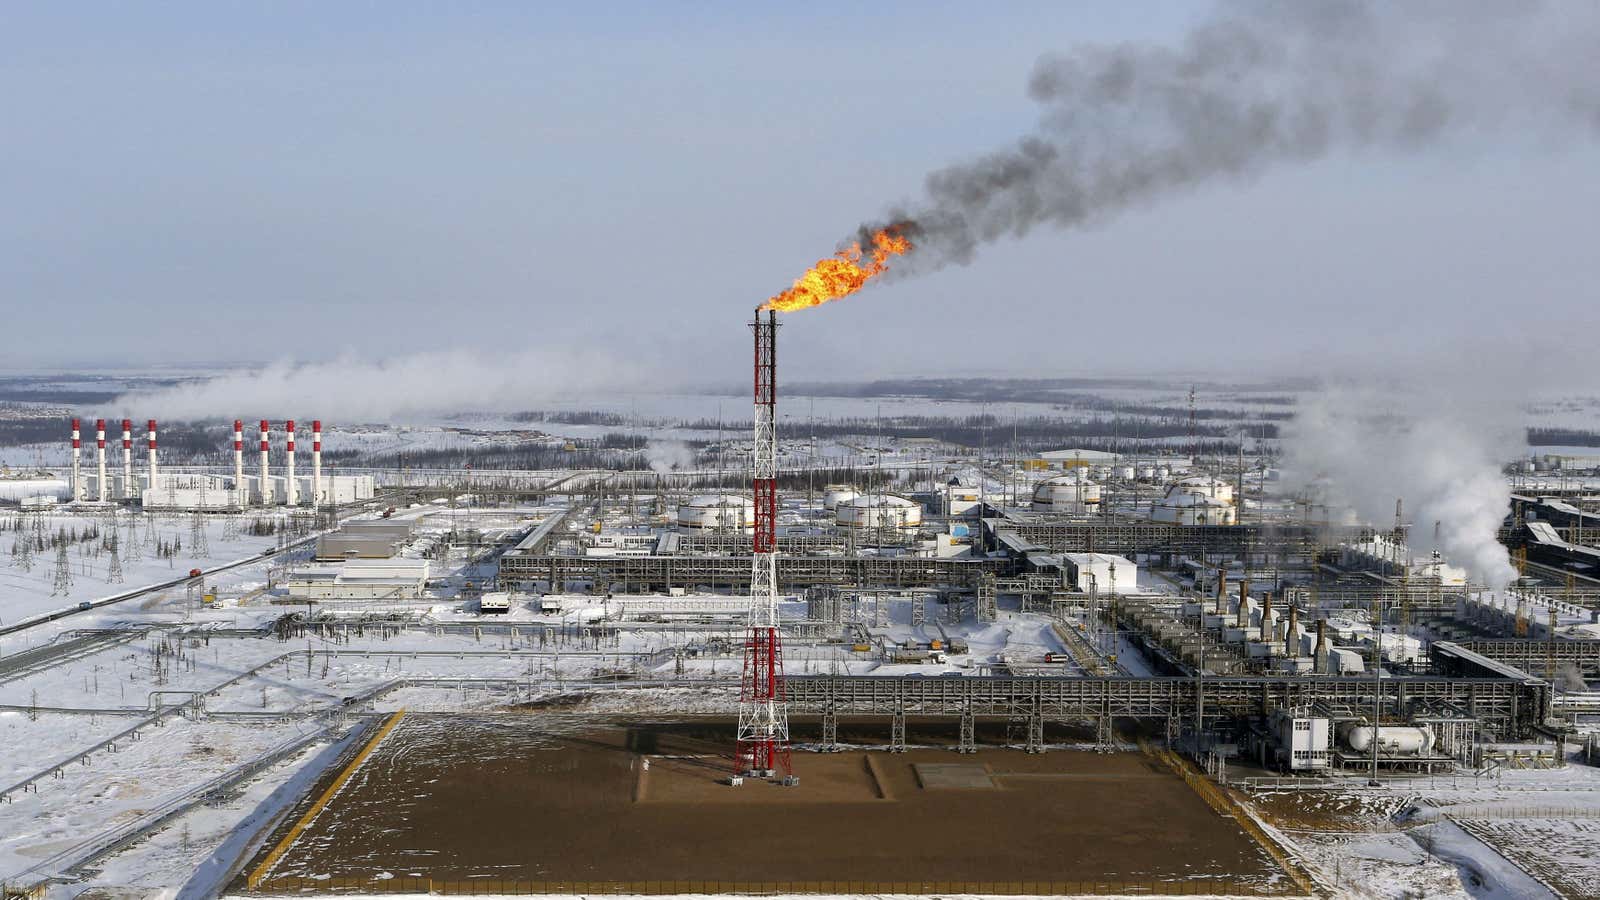 Russian oil fields supply Europe with a quarter of its oil.